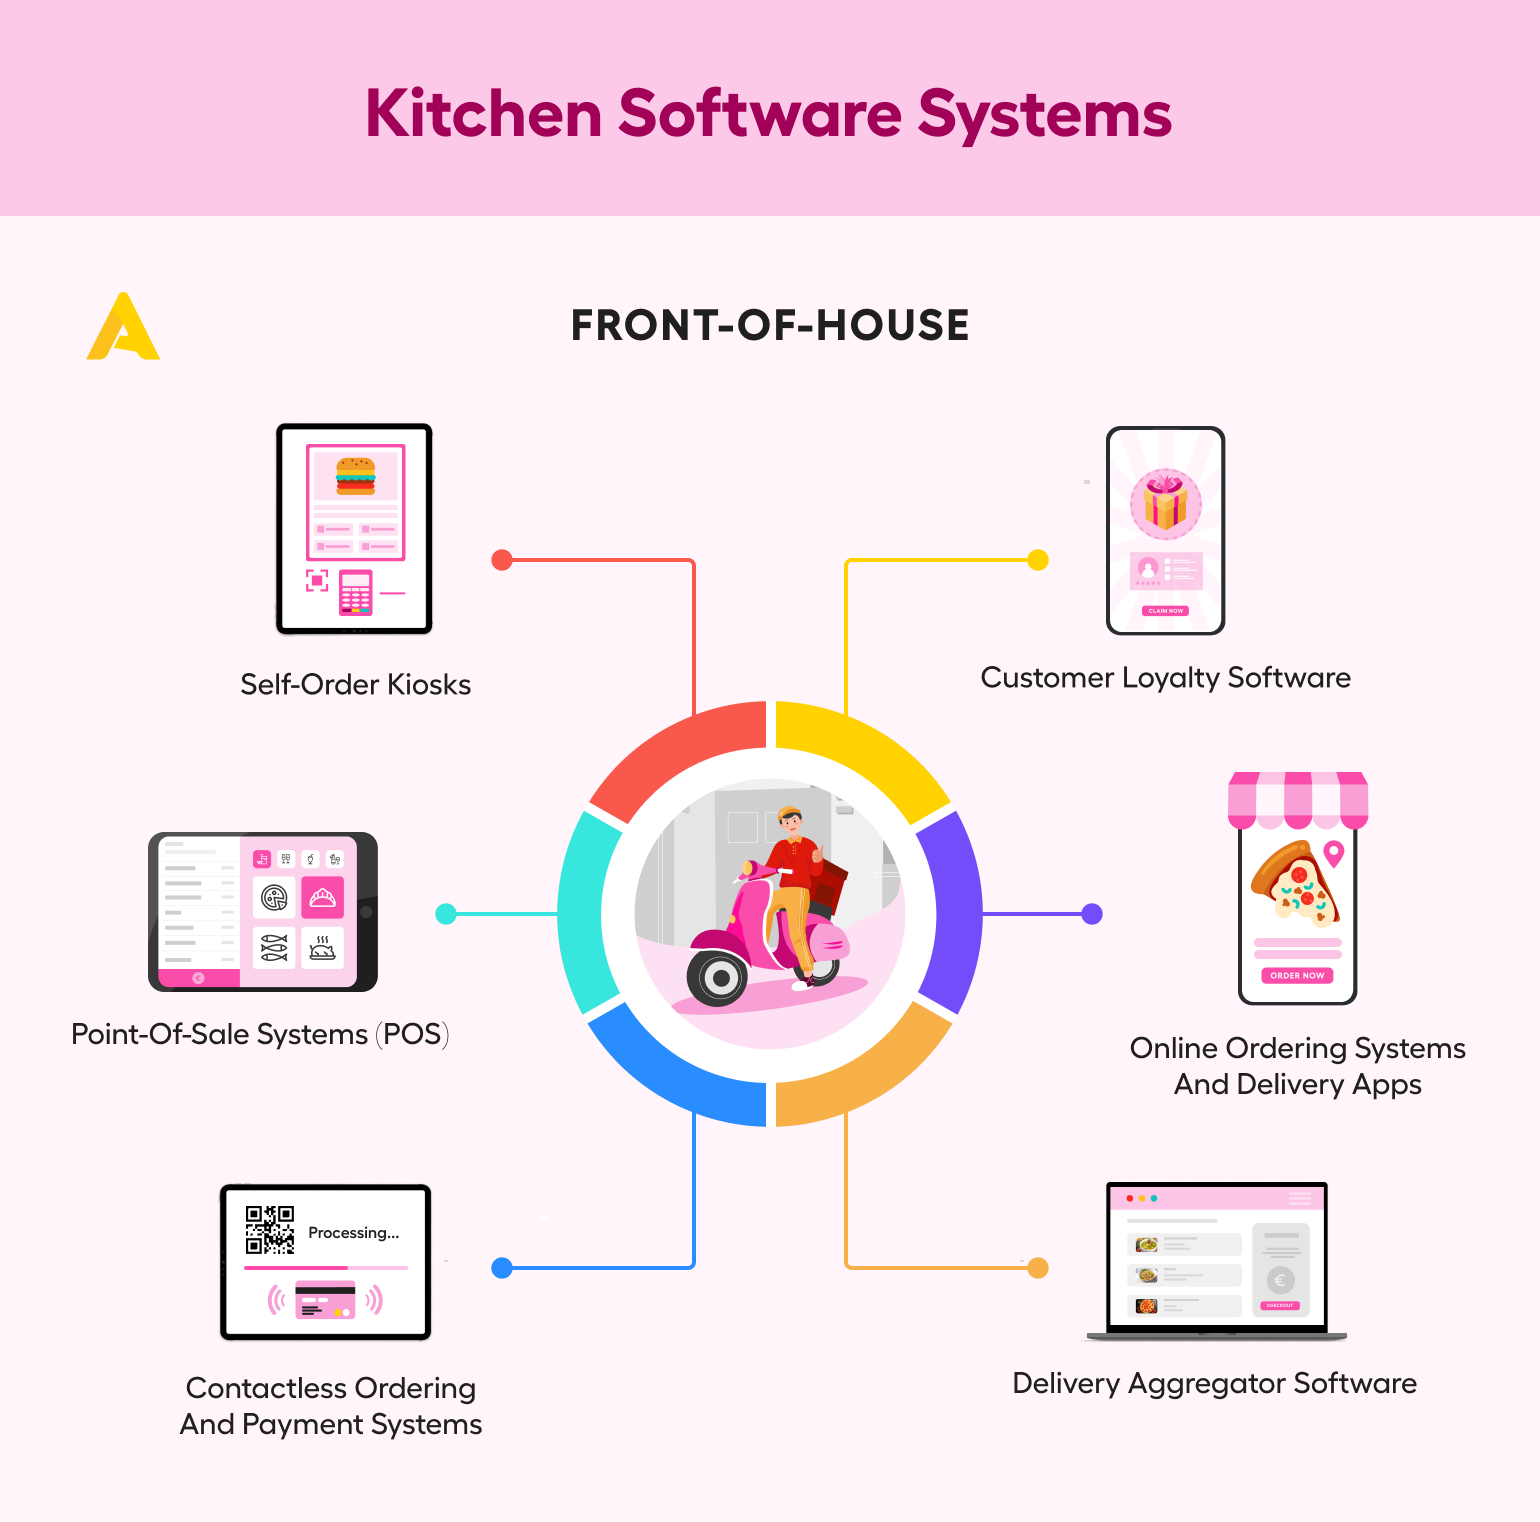 Kitchen Software - Front-of-house